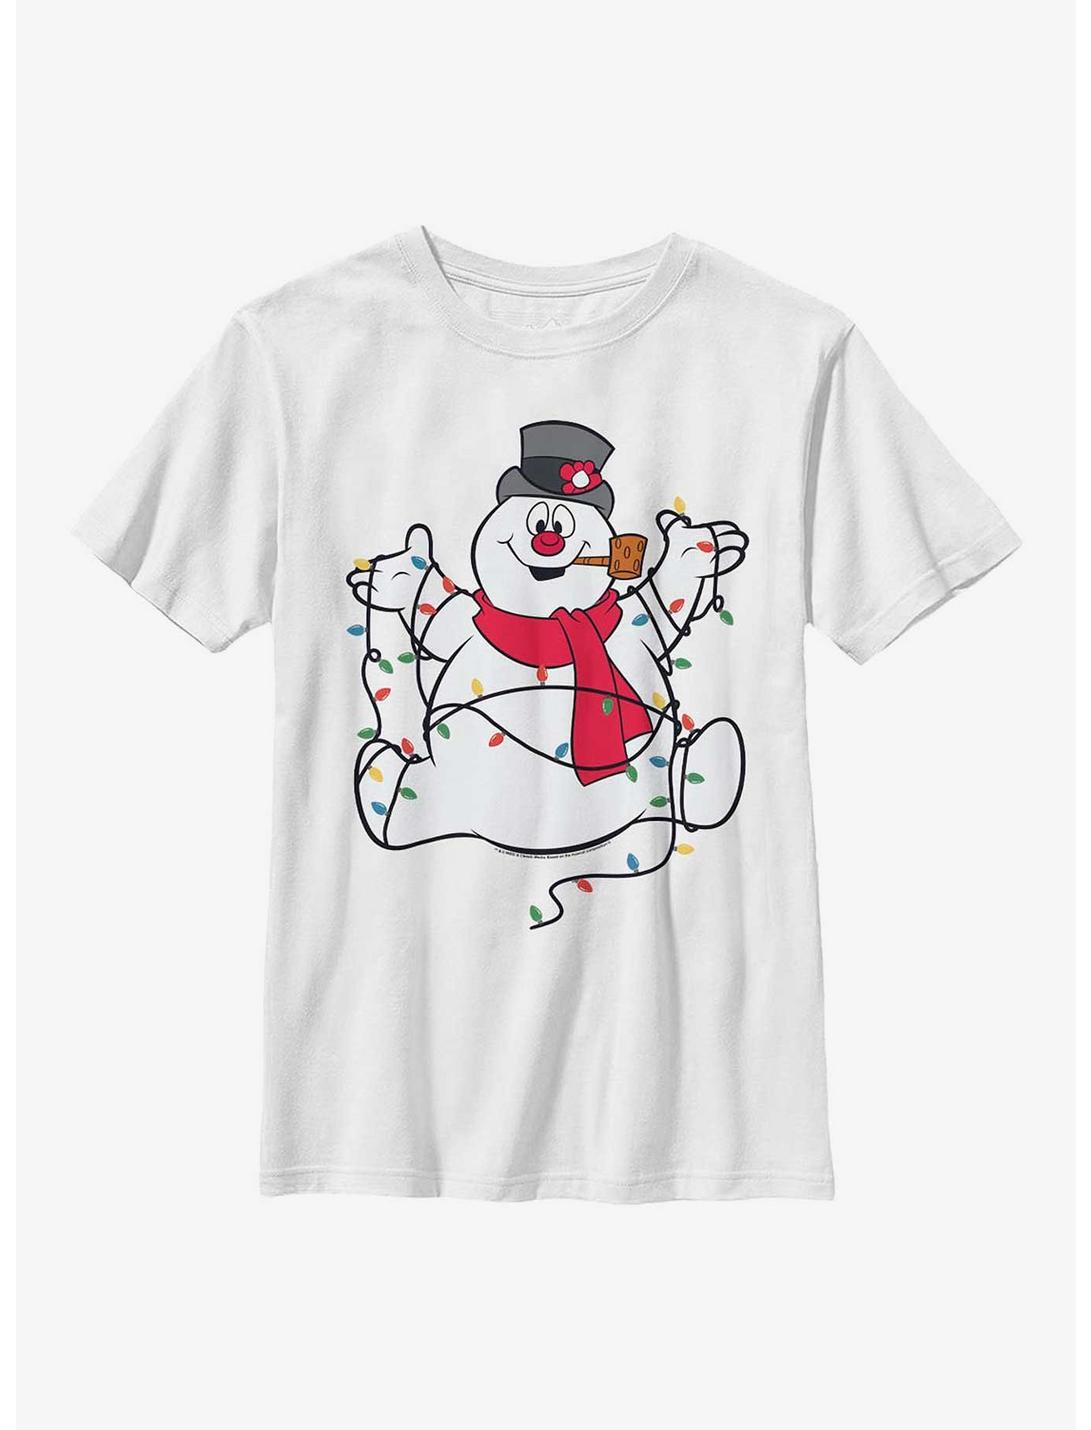 Frosty The Snowman Tangled Christmas Lights Youth T-Shirt, WHITE, hi-res